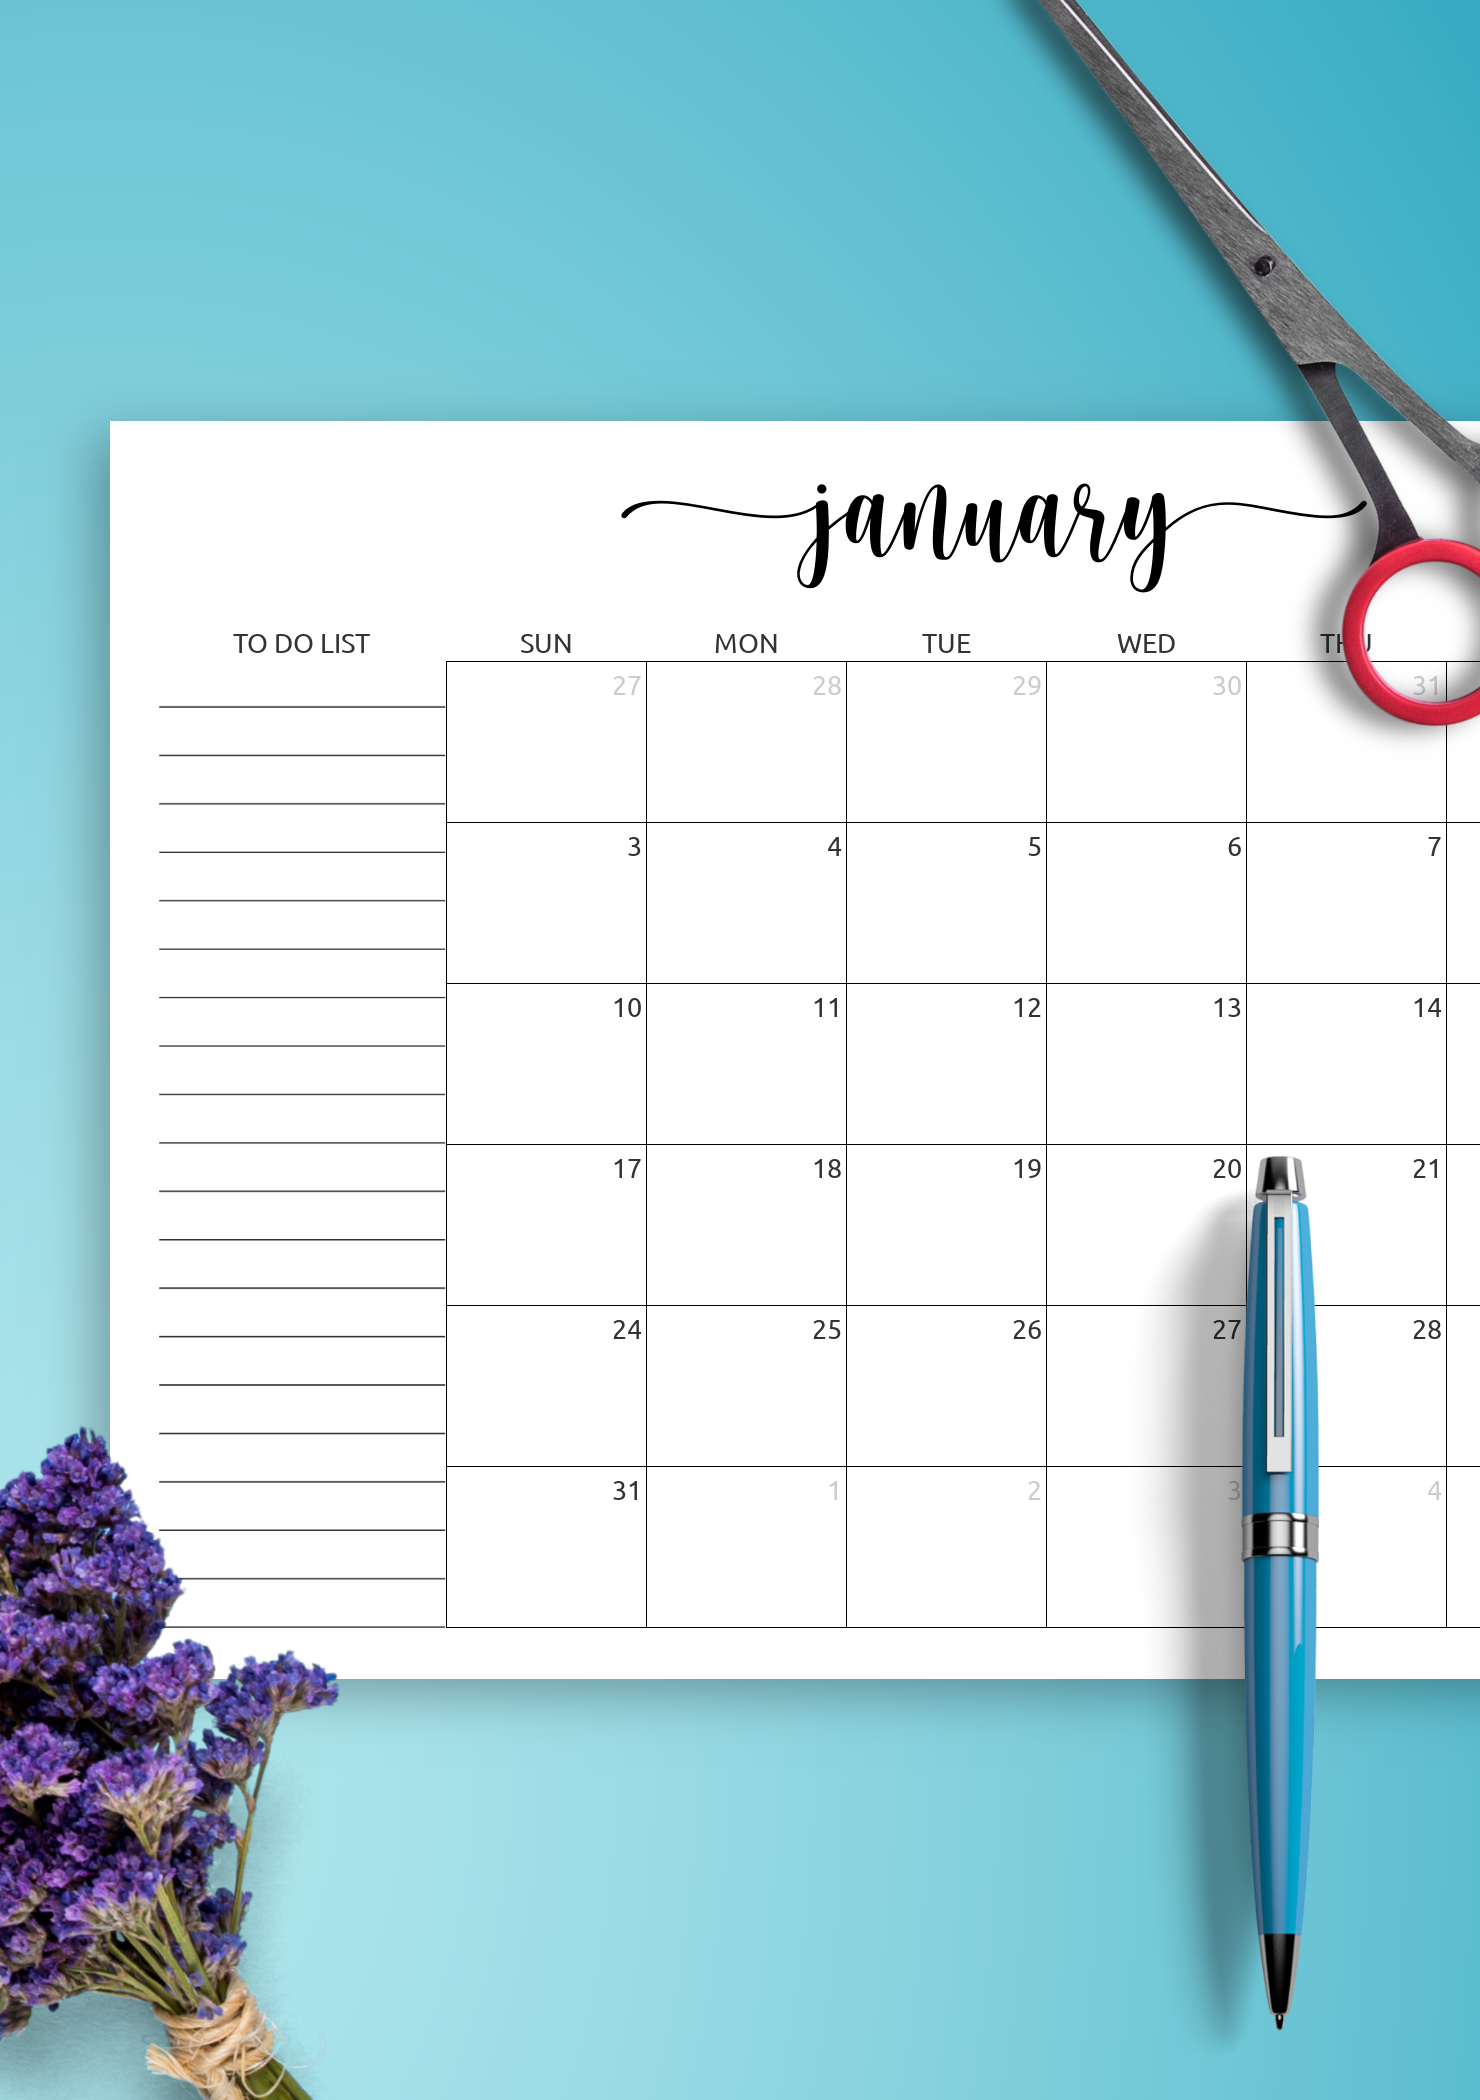 Download Printable Monthly Calendar with To-Do List PDF